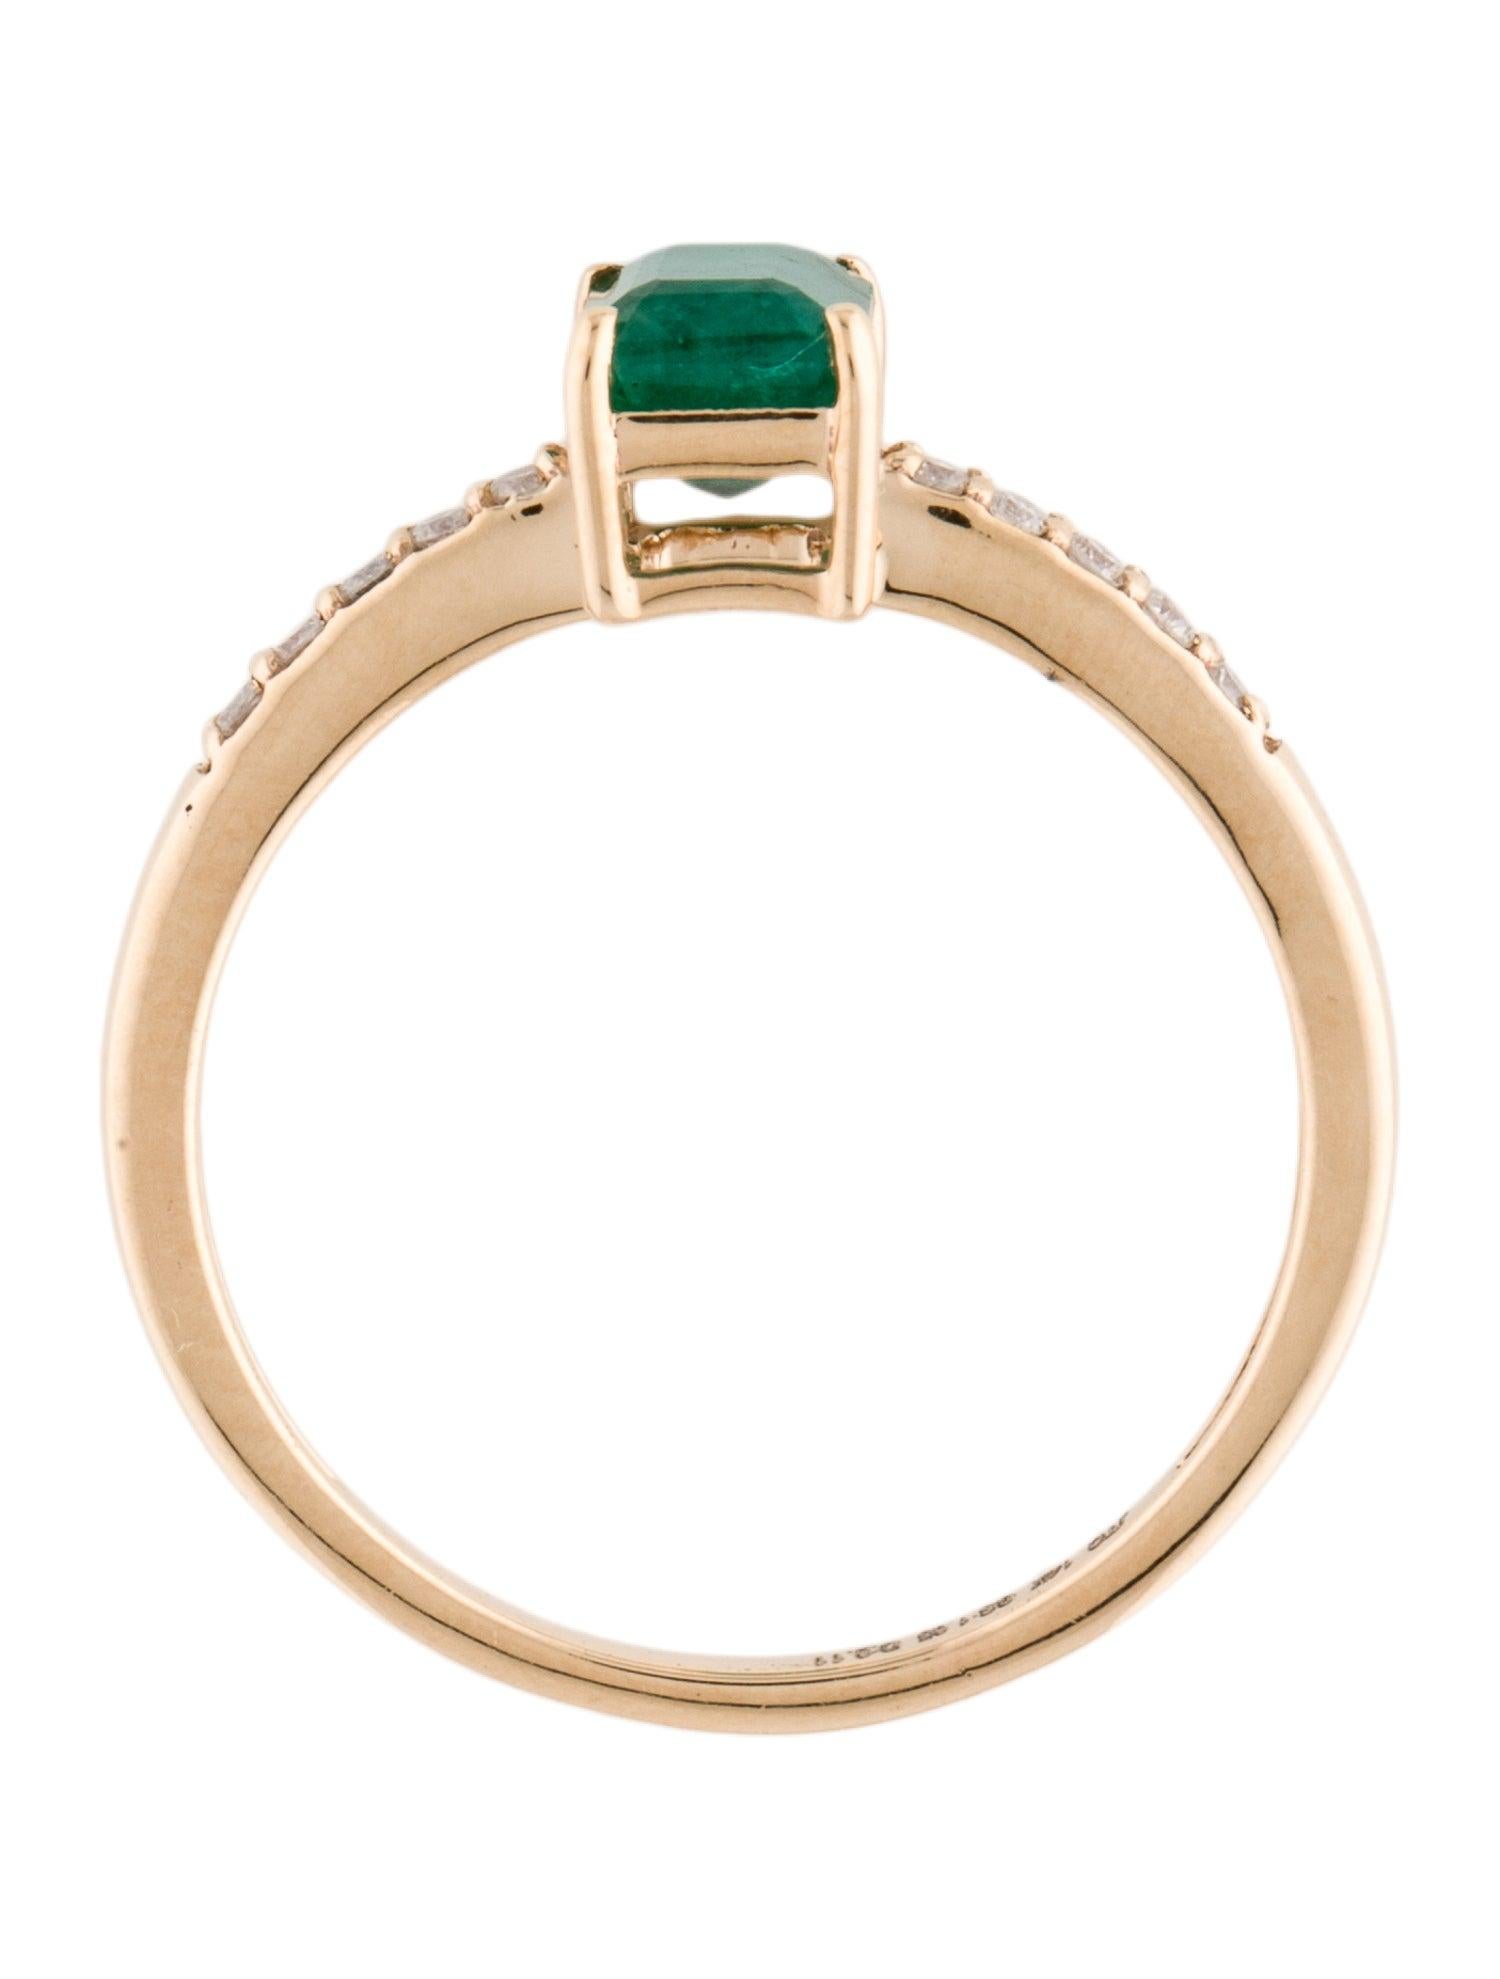 Elegant 14K Gold 1.05ct Emerald & Diamond Ring - Size 8.75 - Classic & Timeless In New Condition For Sale In Holtsville, NY